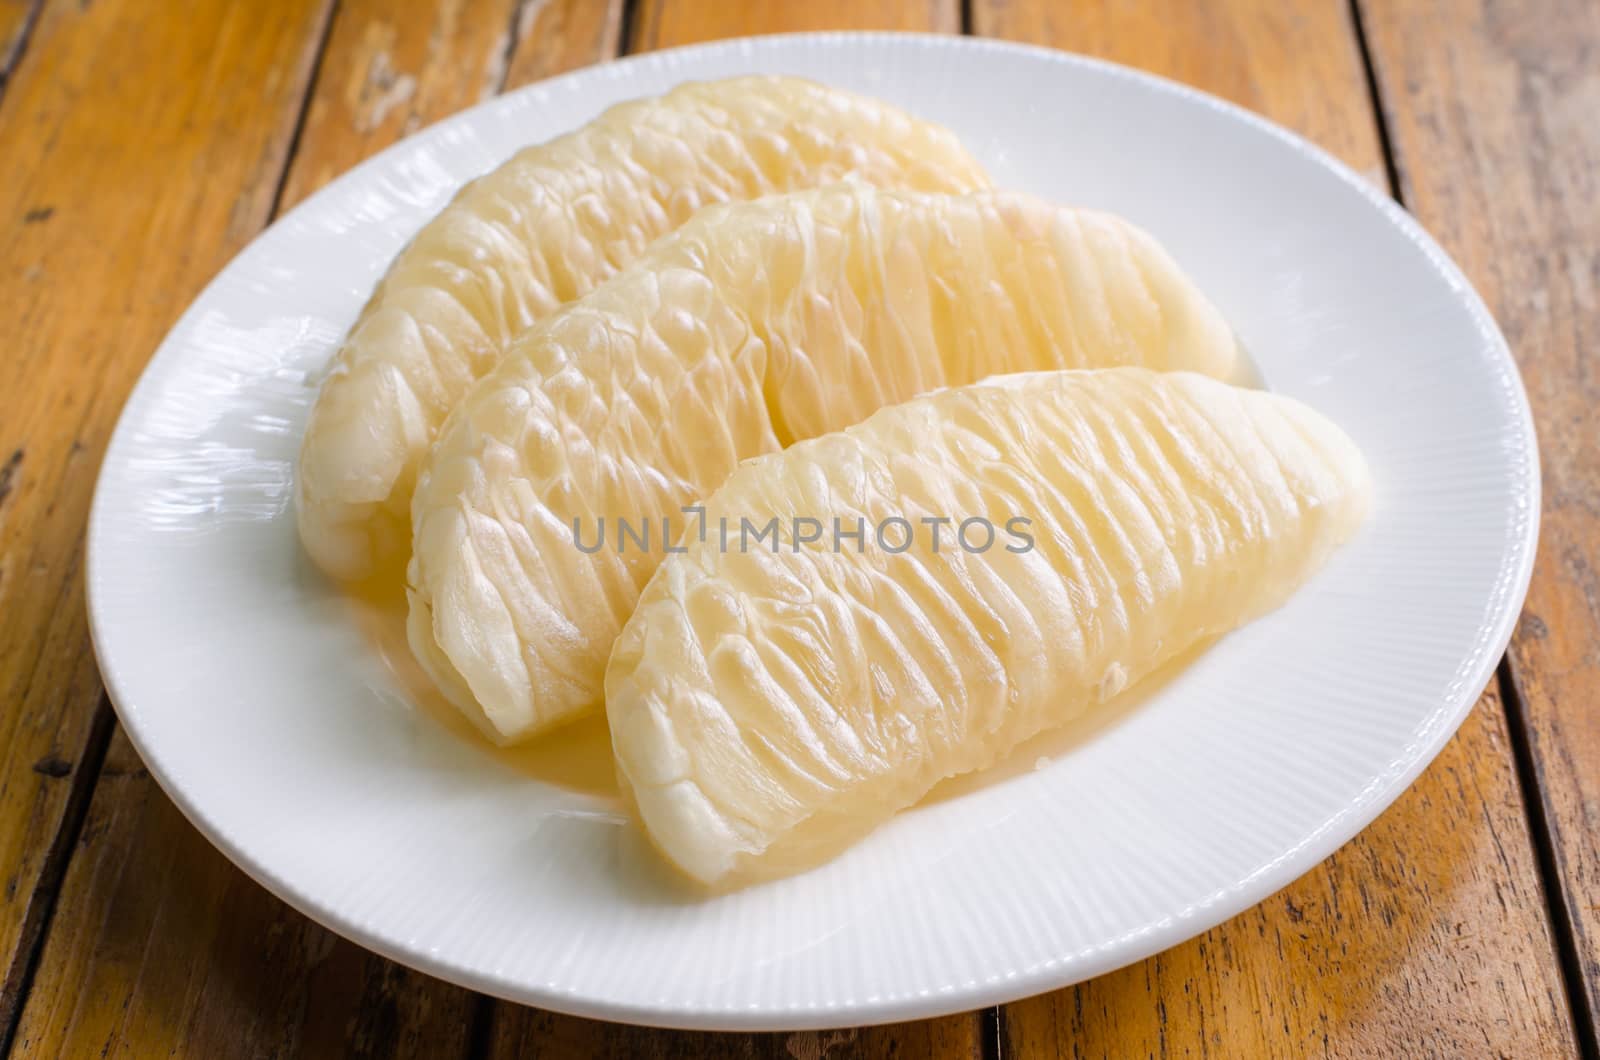 Thai pomelo fruit Peeled in white dish on wood table.